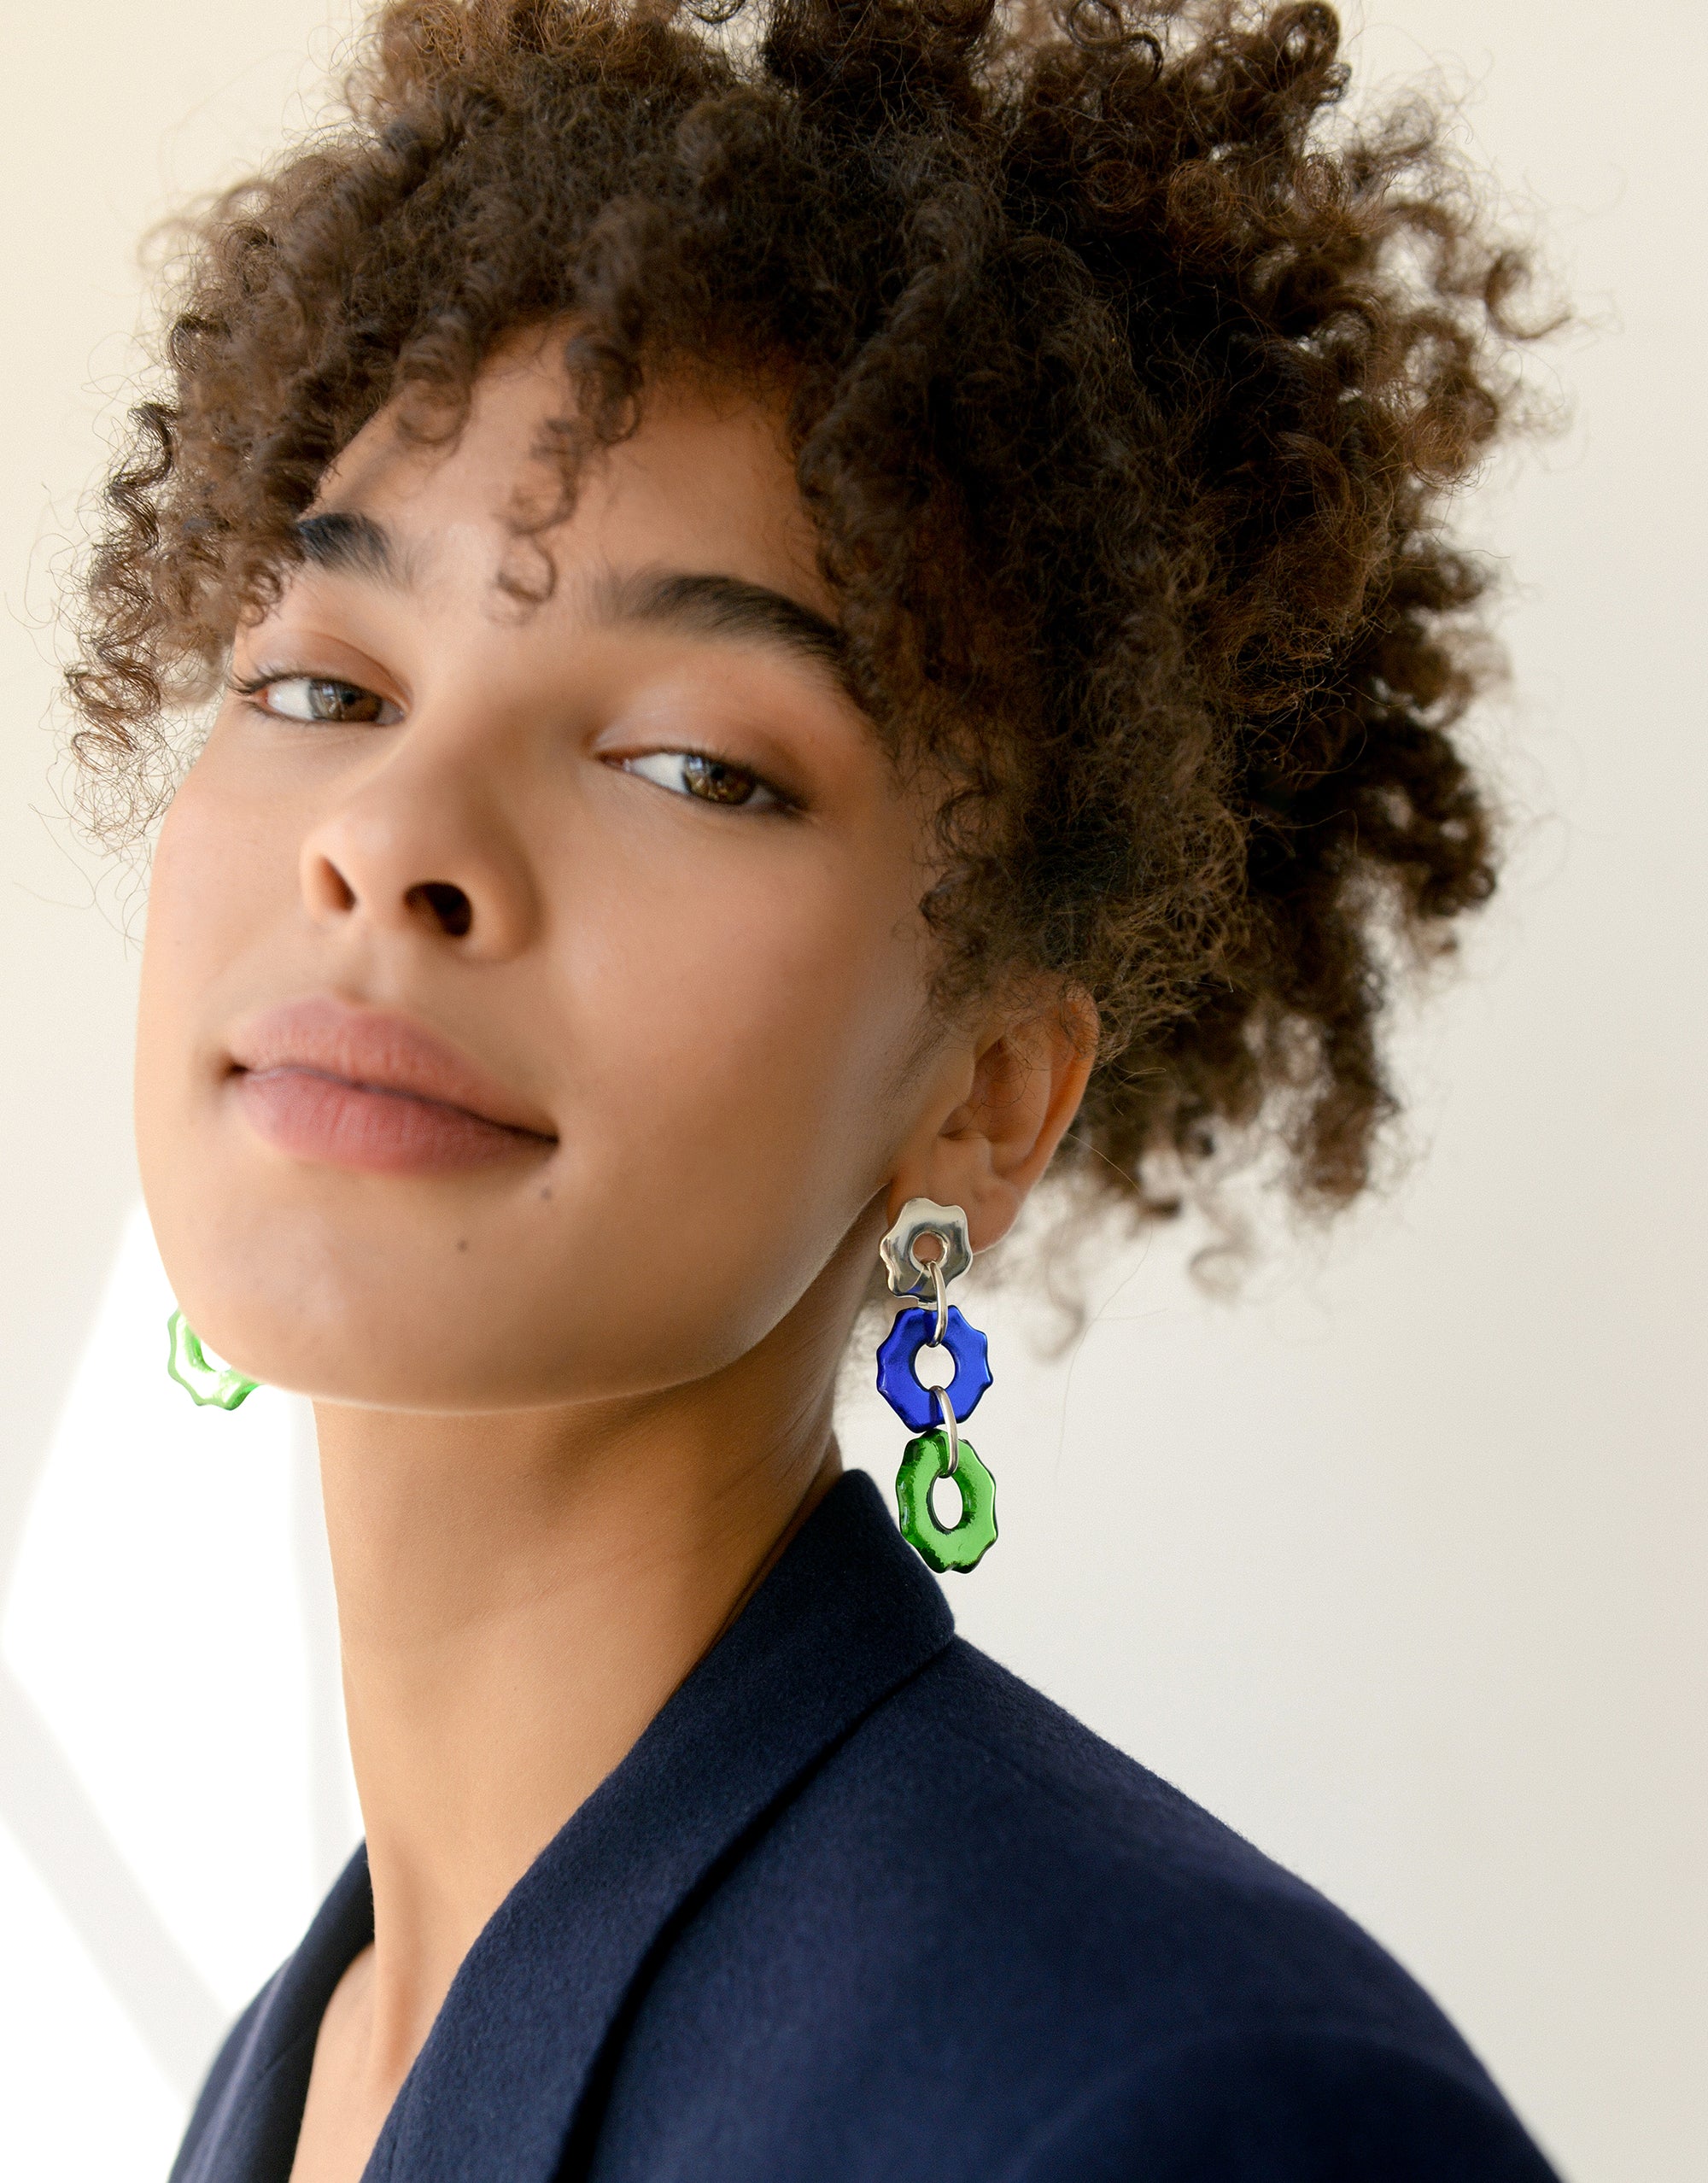 CLED Eco Conscious Sustainable upcycled jewelry made from Eco Gems and sterling silver from recycled glass | Avens Earrings Trio